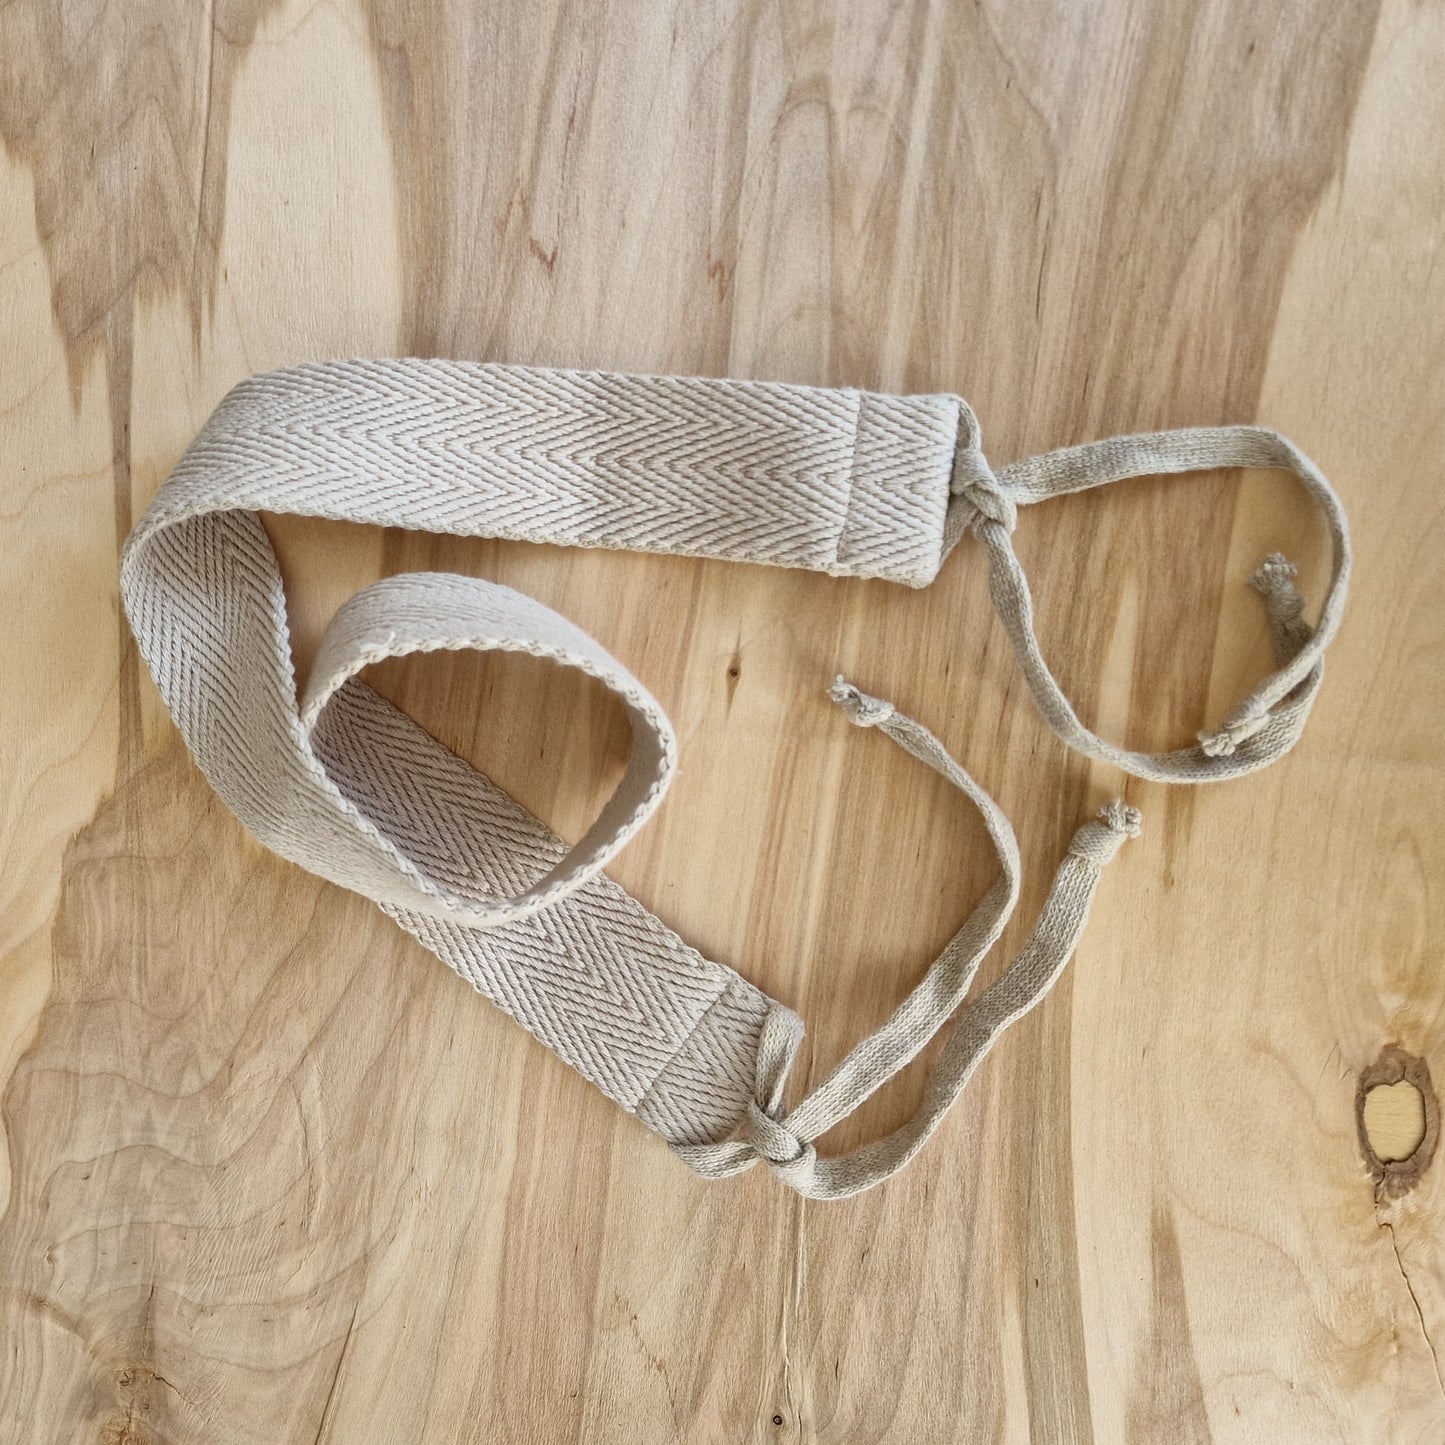 Linen belt 4x67.5 cm with tying cords and adjustable length (DZPÉ)